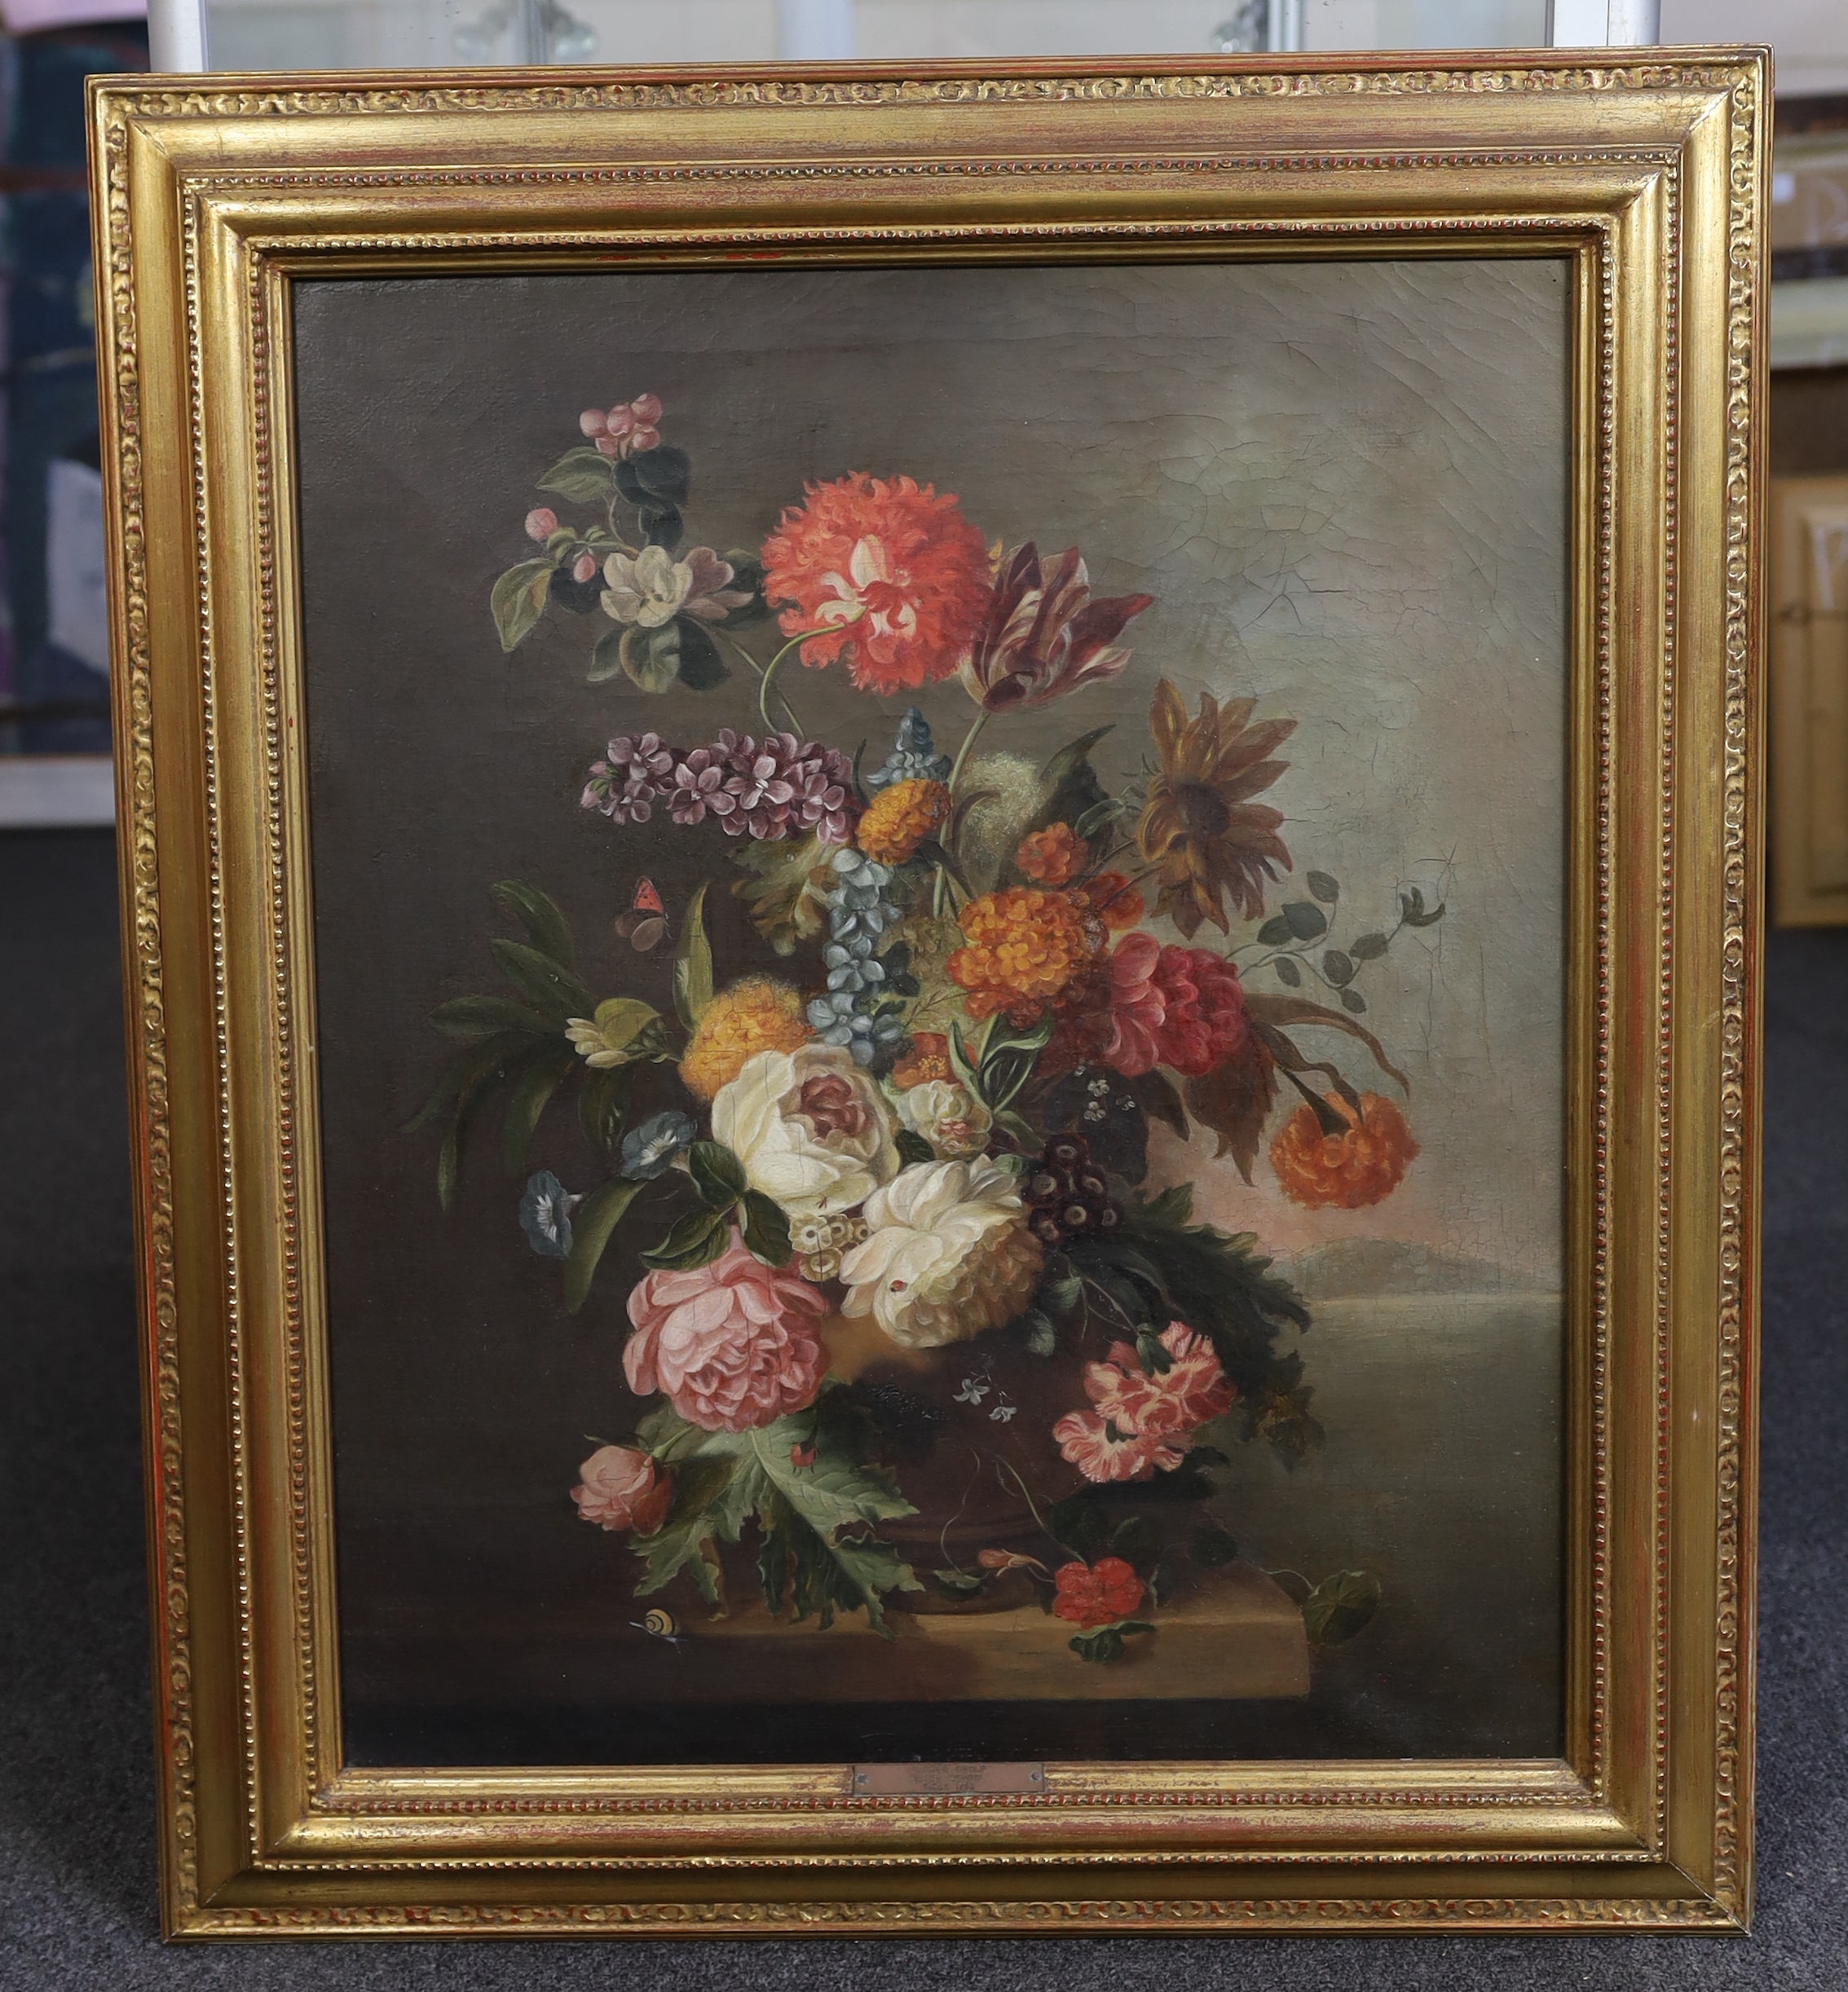 Dutch School c.1750, Still life of flowers in a vase upon a ledge, oil on canvas, 60 x 49cm